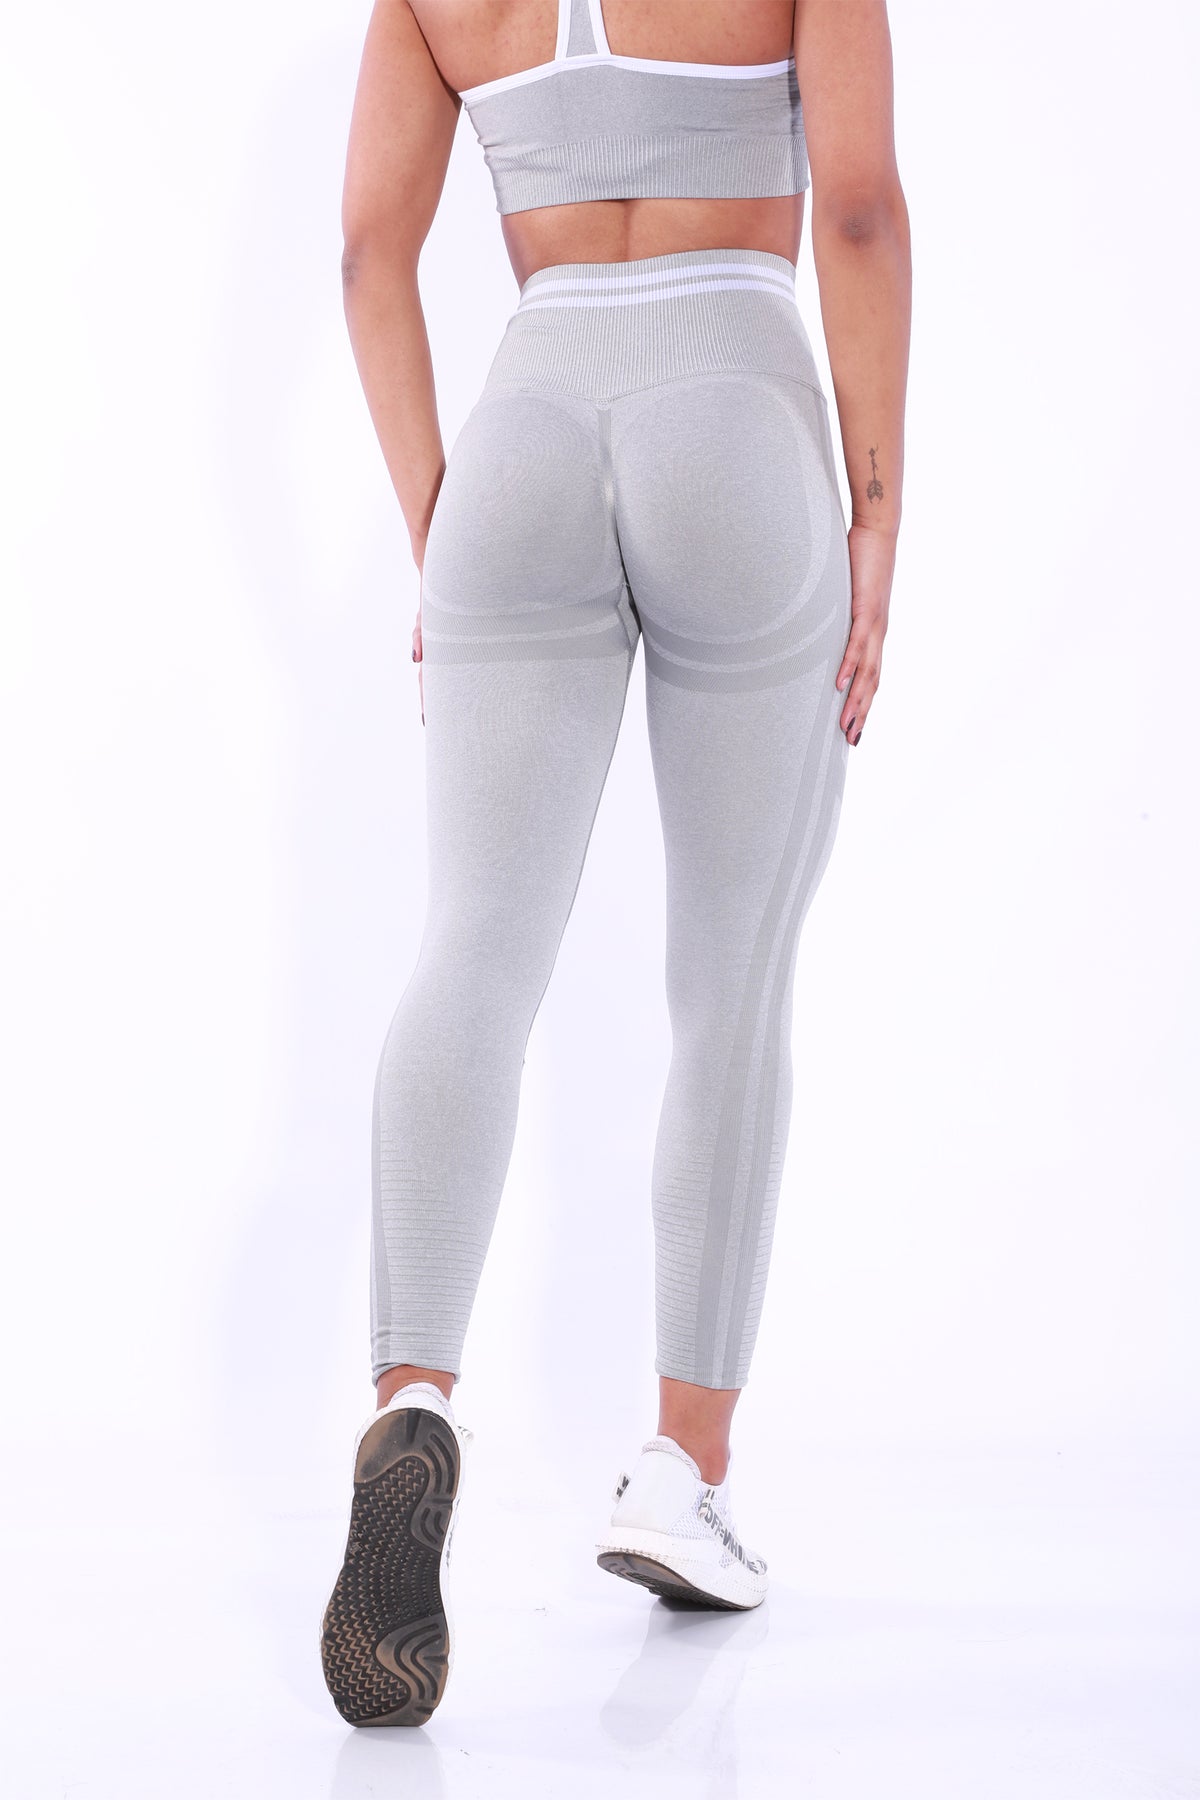 Gymbunny Seamless scrunch leggings have contour shadowing designed to  enhance the beauty of your natural curves. – Shape Wear Shop